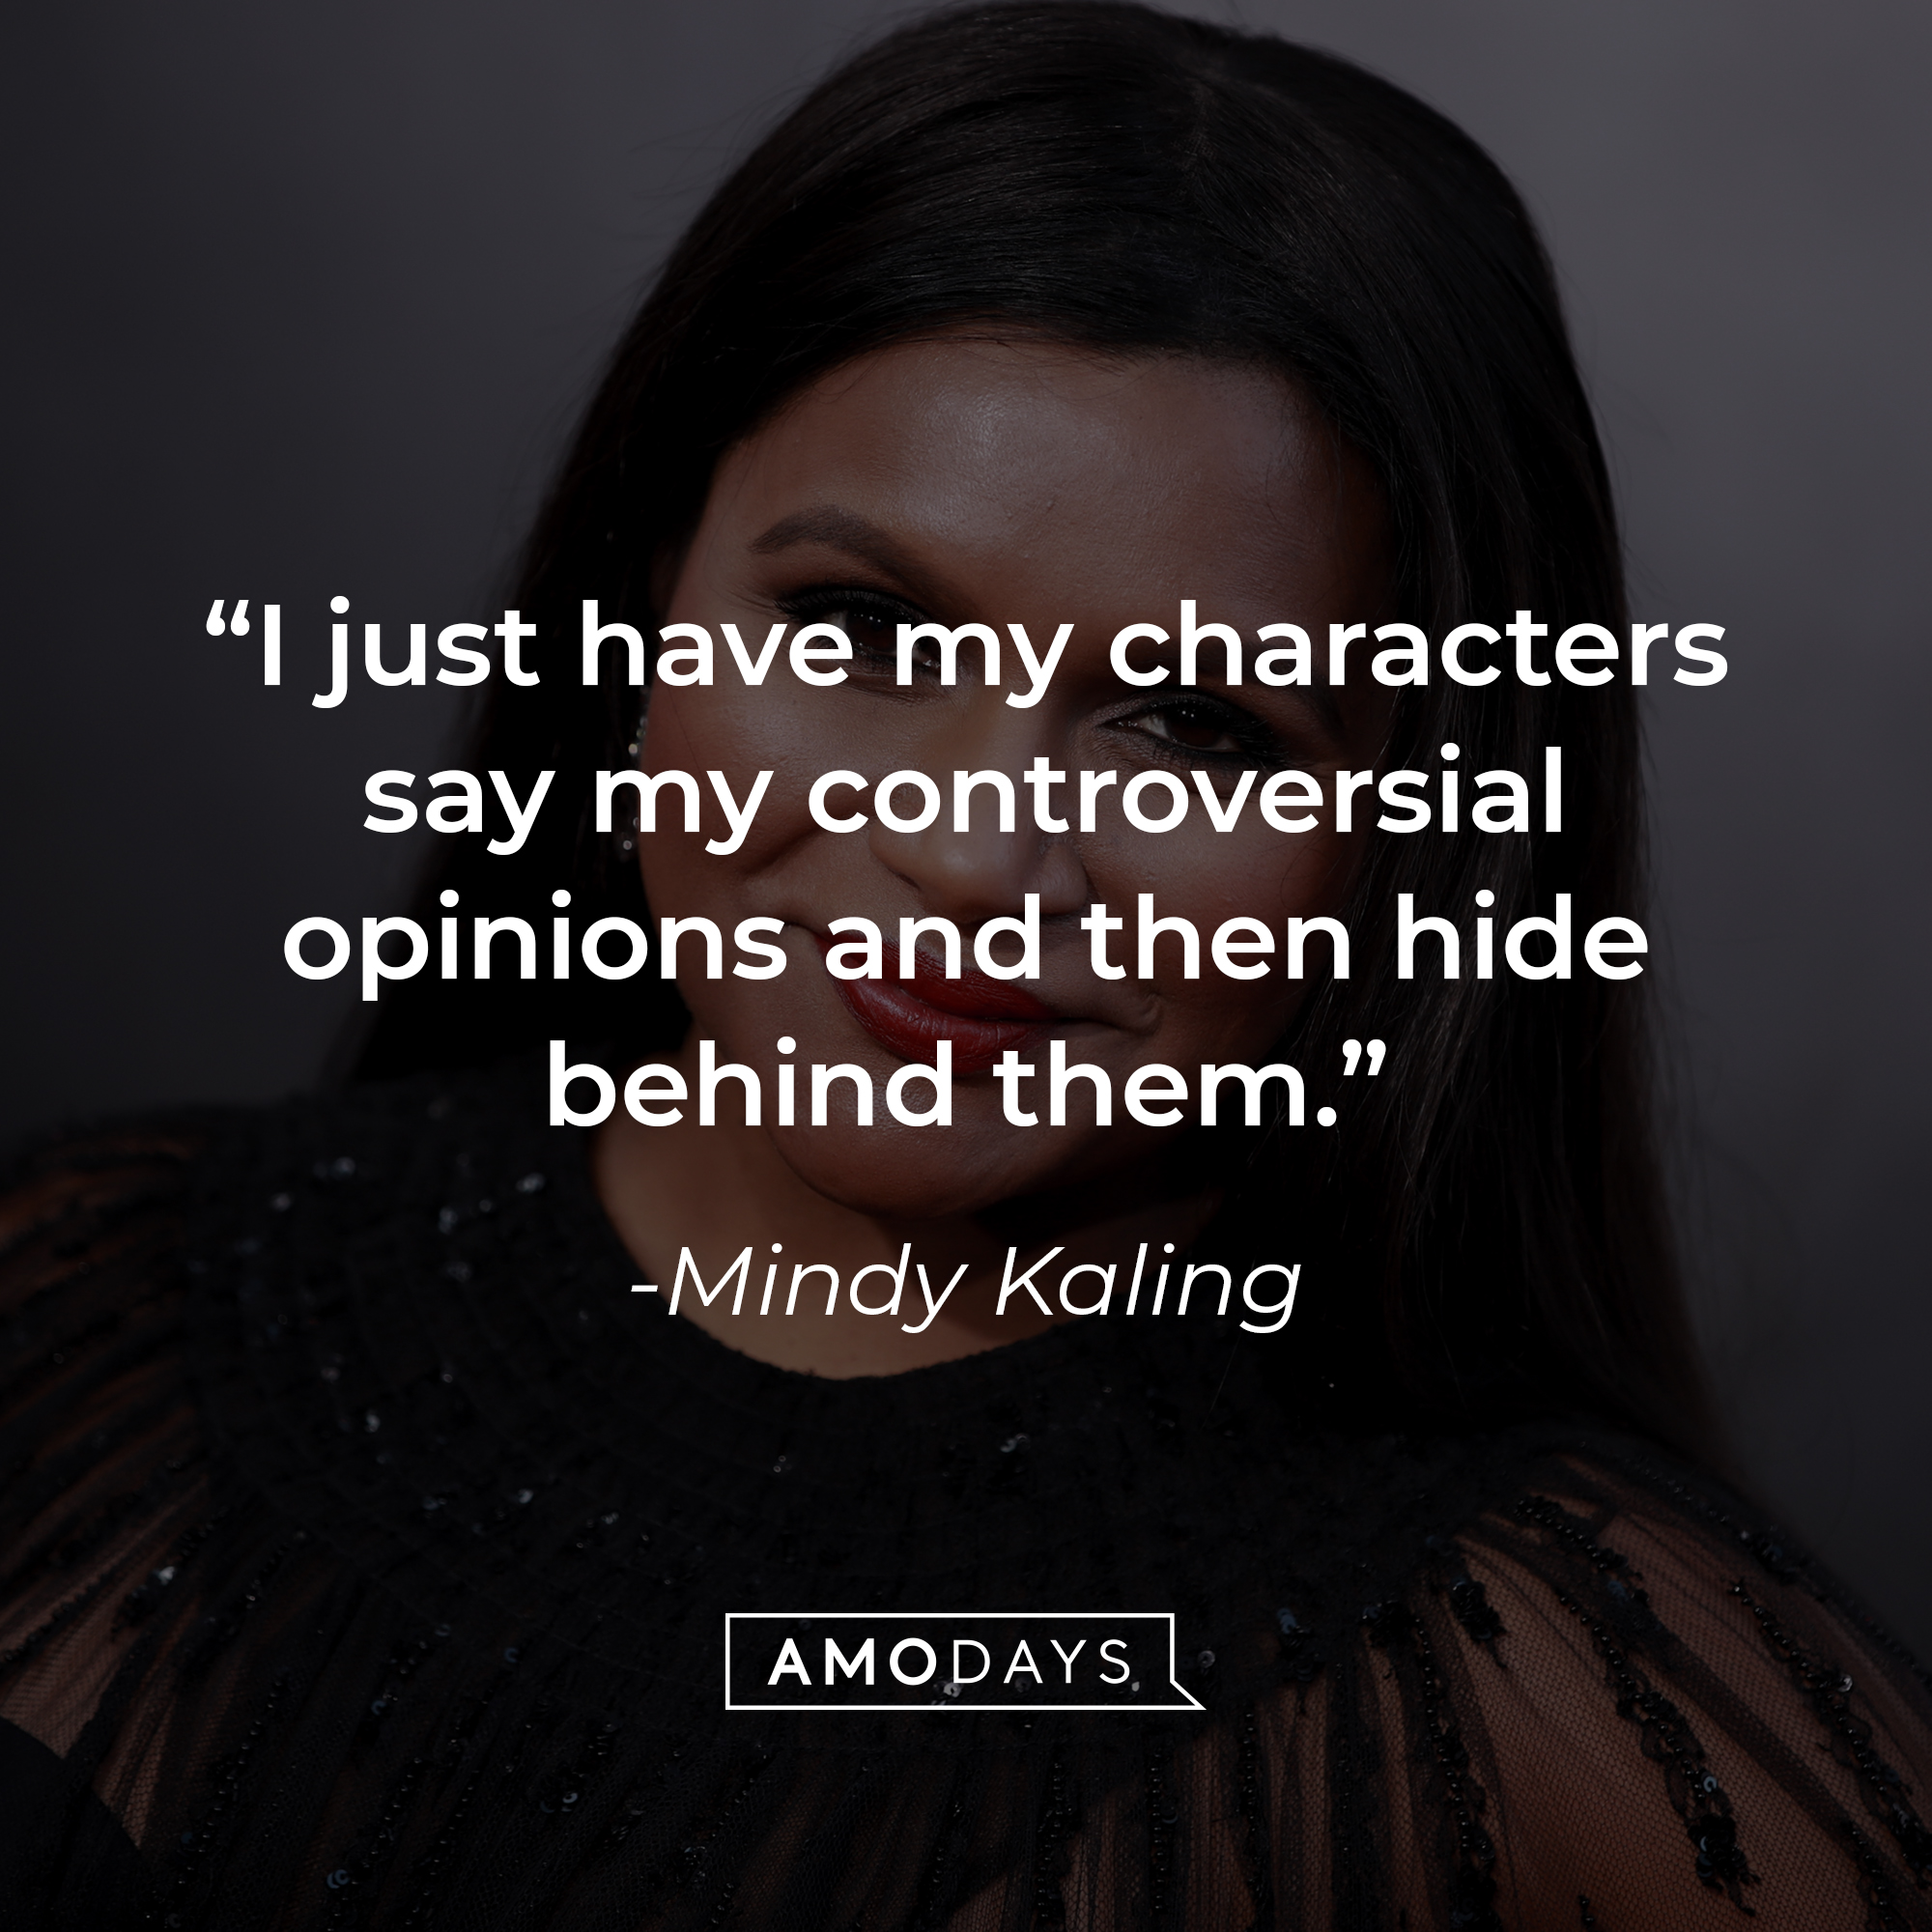 Mindy Kaling's quote: "I just have my characters say my controversial opinions and then hide behind them." | Source: Getty Images